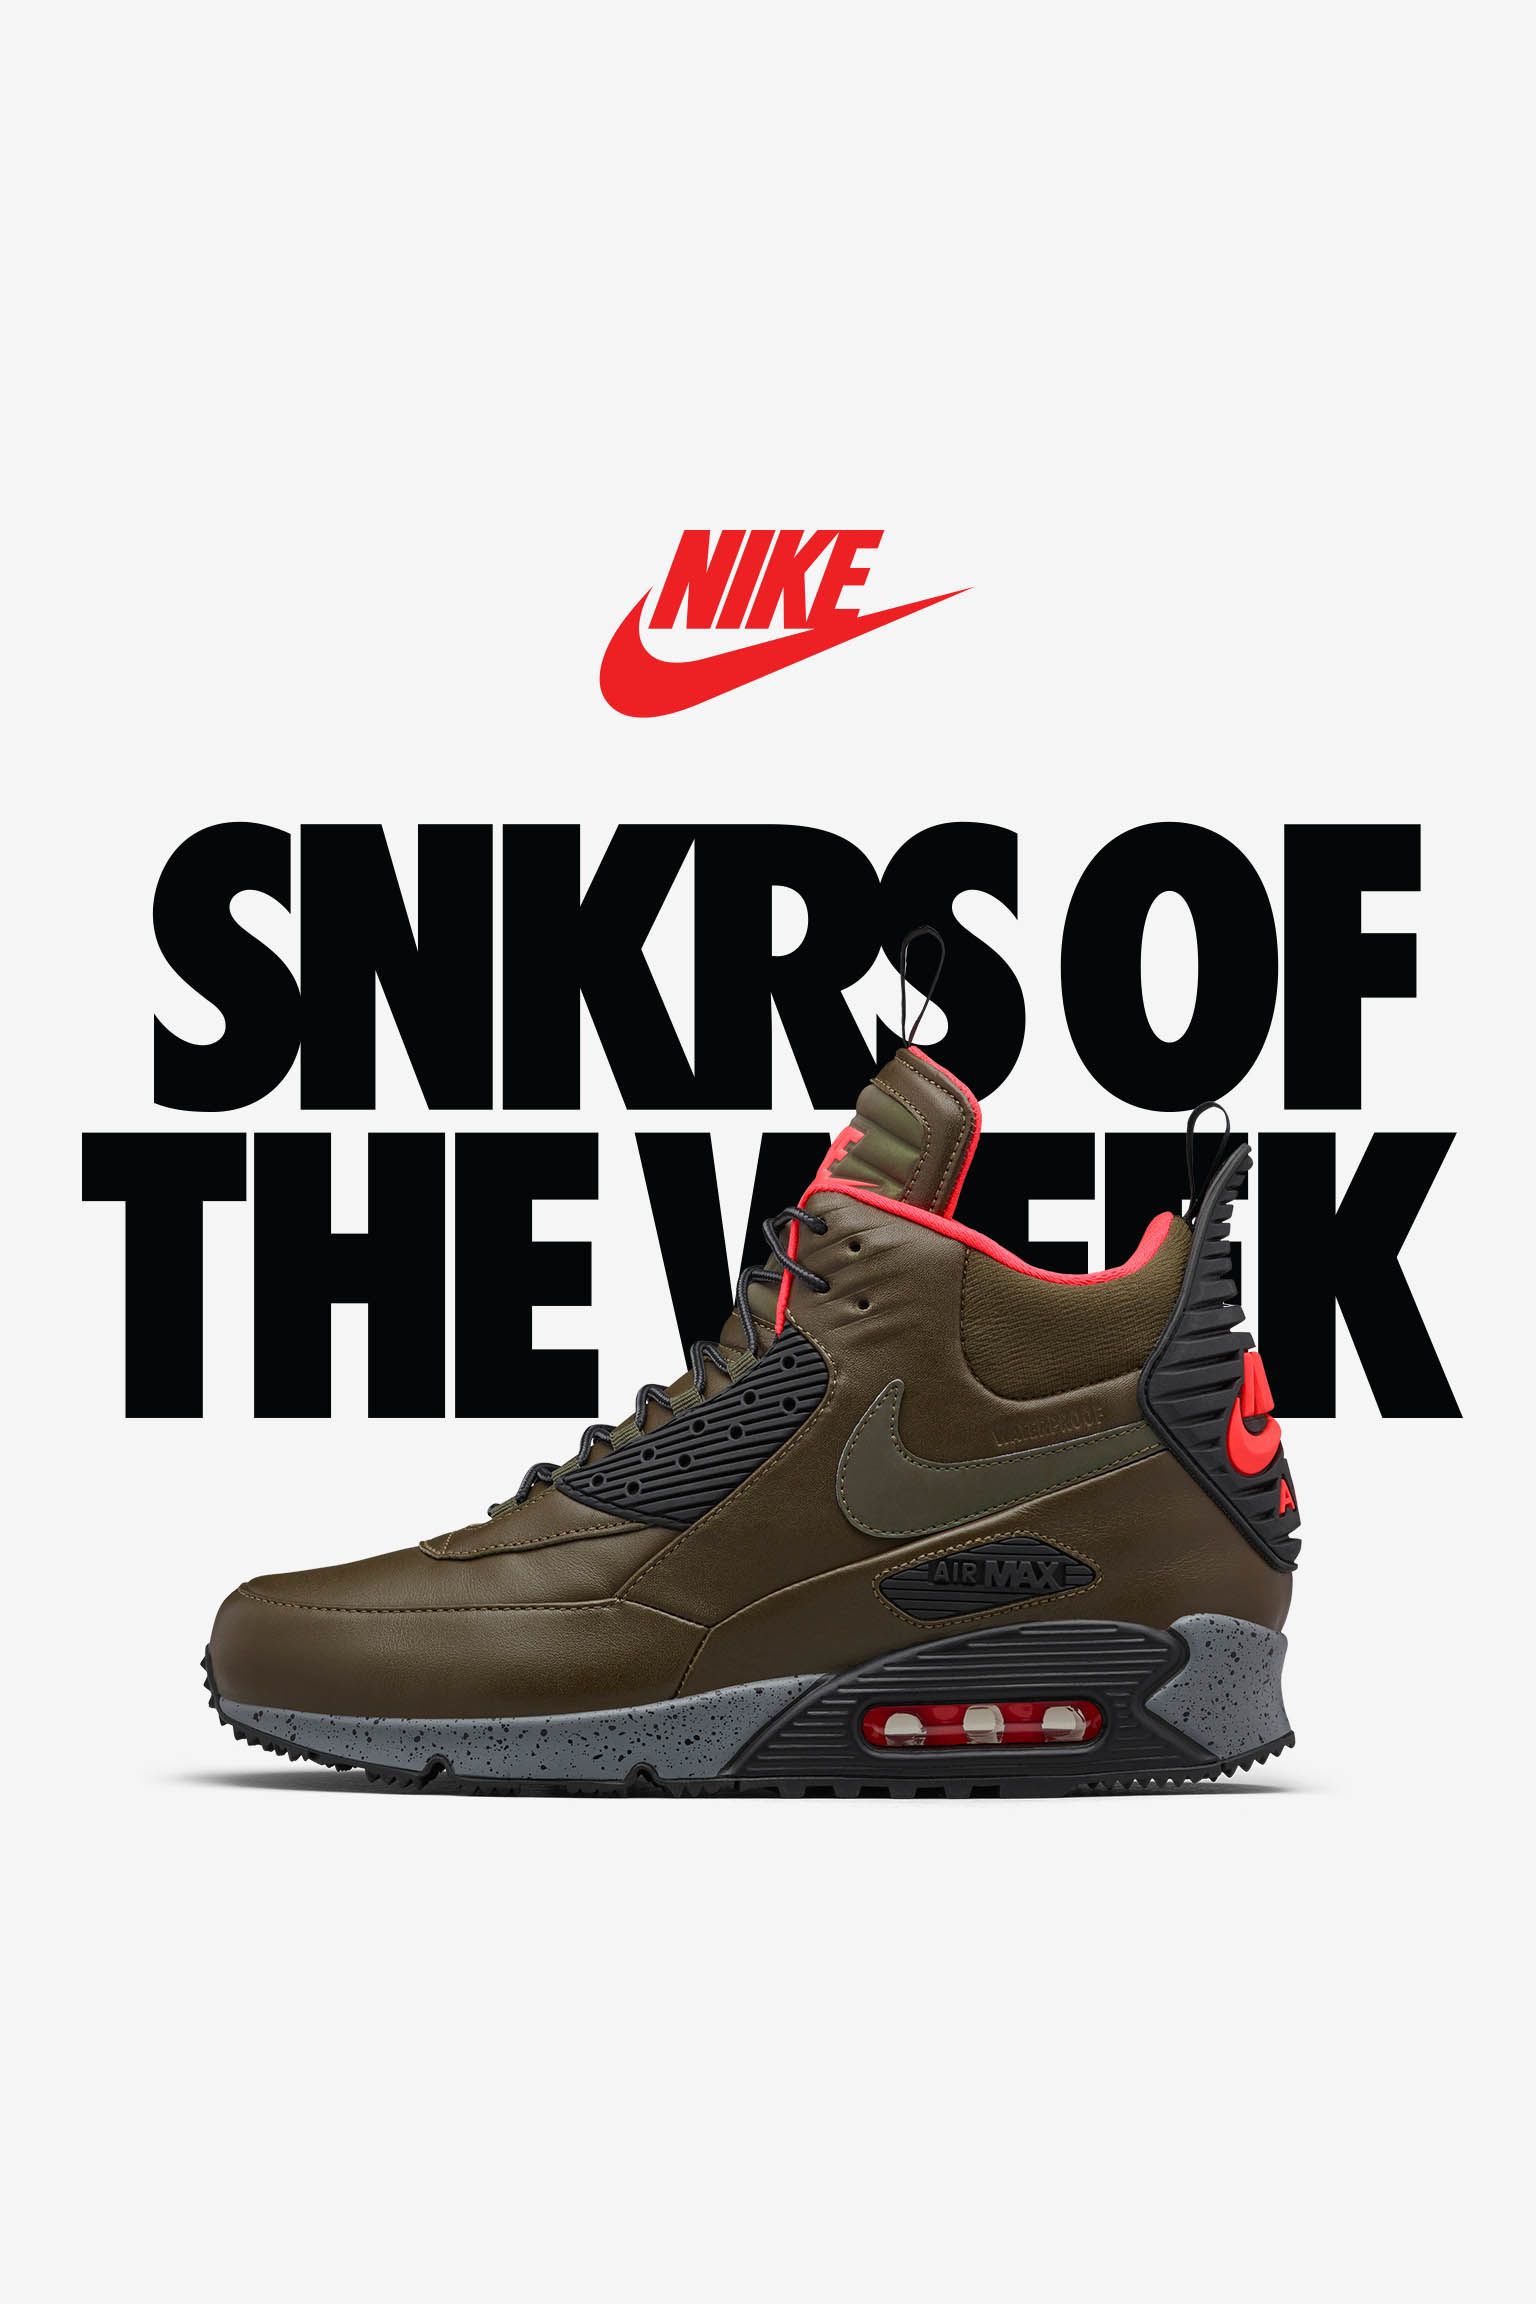 nike air max 90 winter sneaker boots